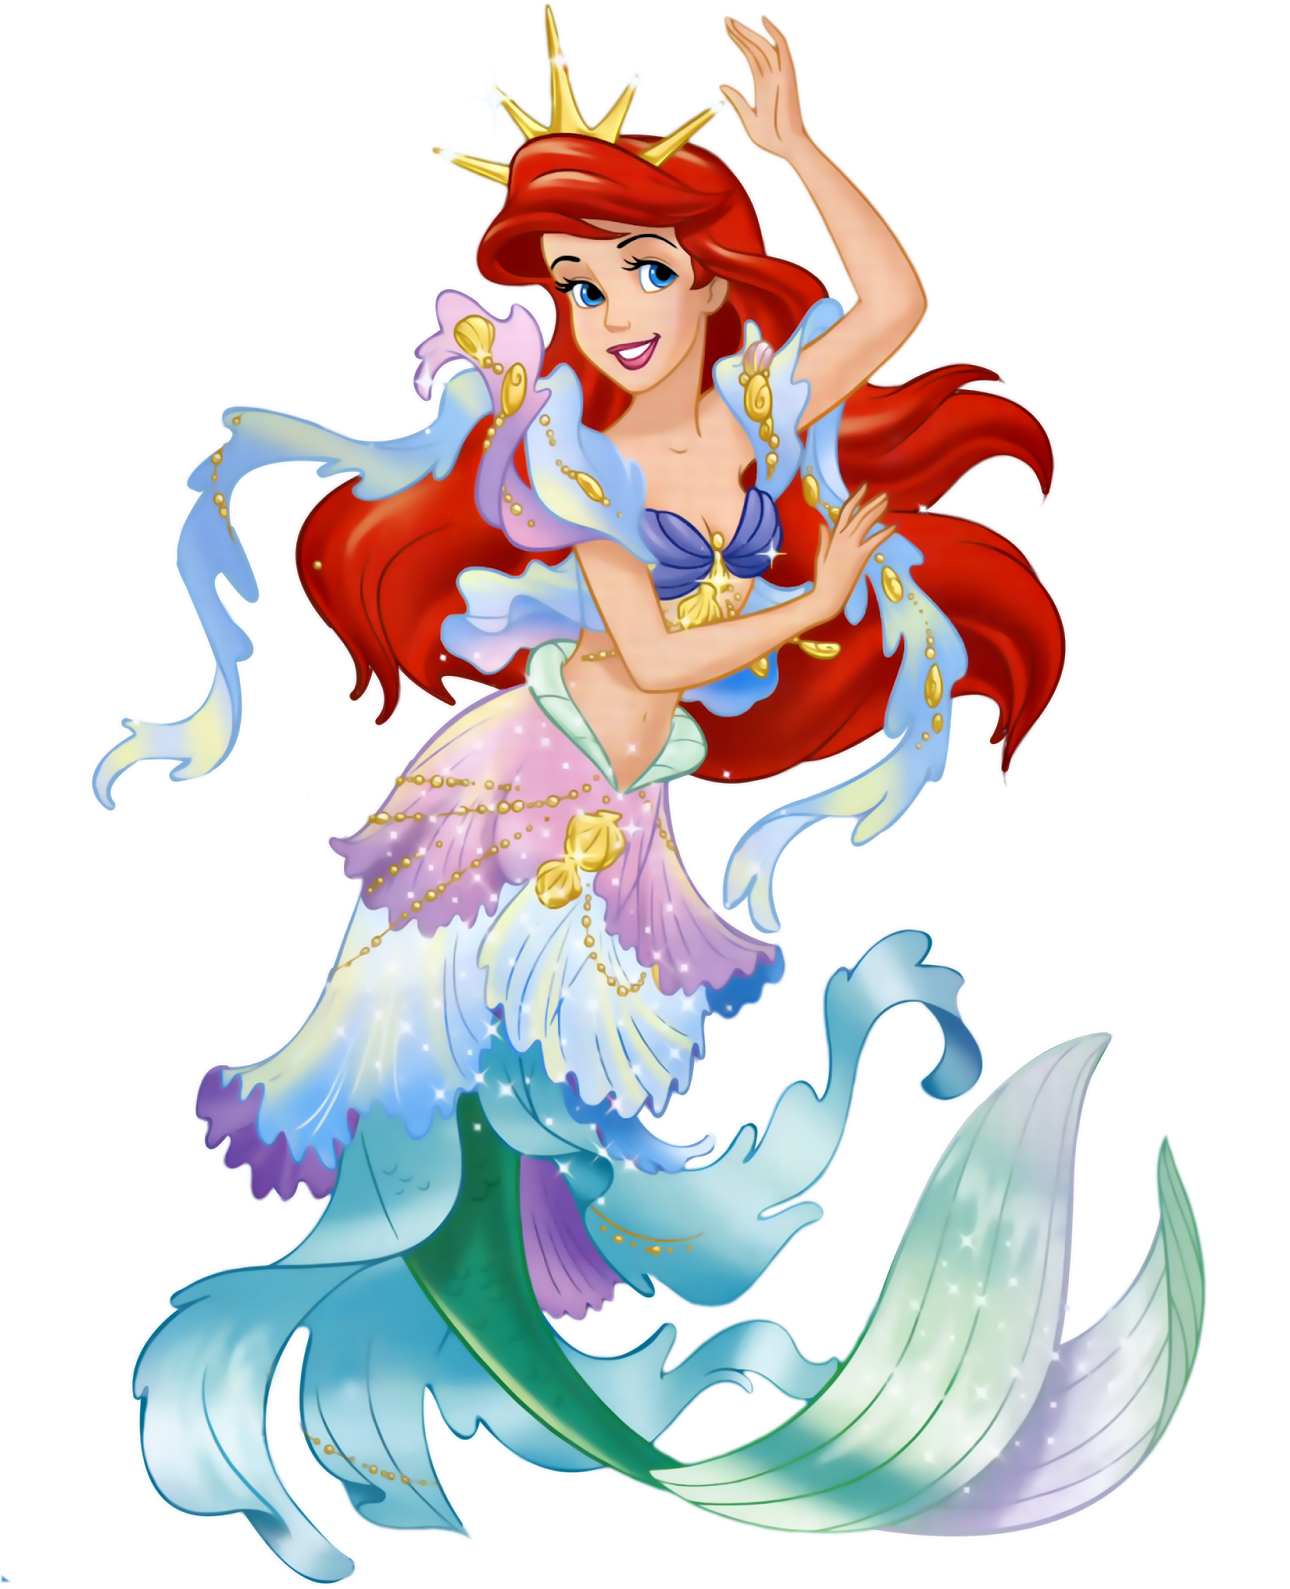 Download Ariel Mermaid, Ariel The Little Mermaid, Mermaid Cartoon, - Ariel  Little Mermaid Character PNG Image with No Background 